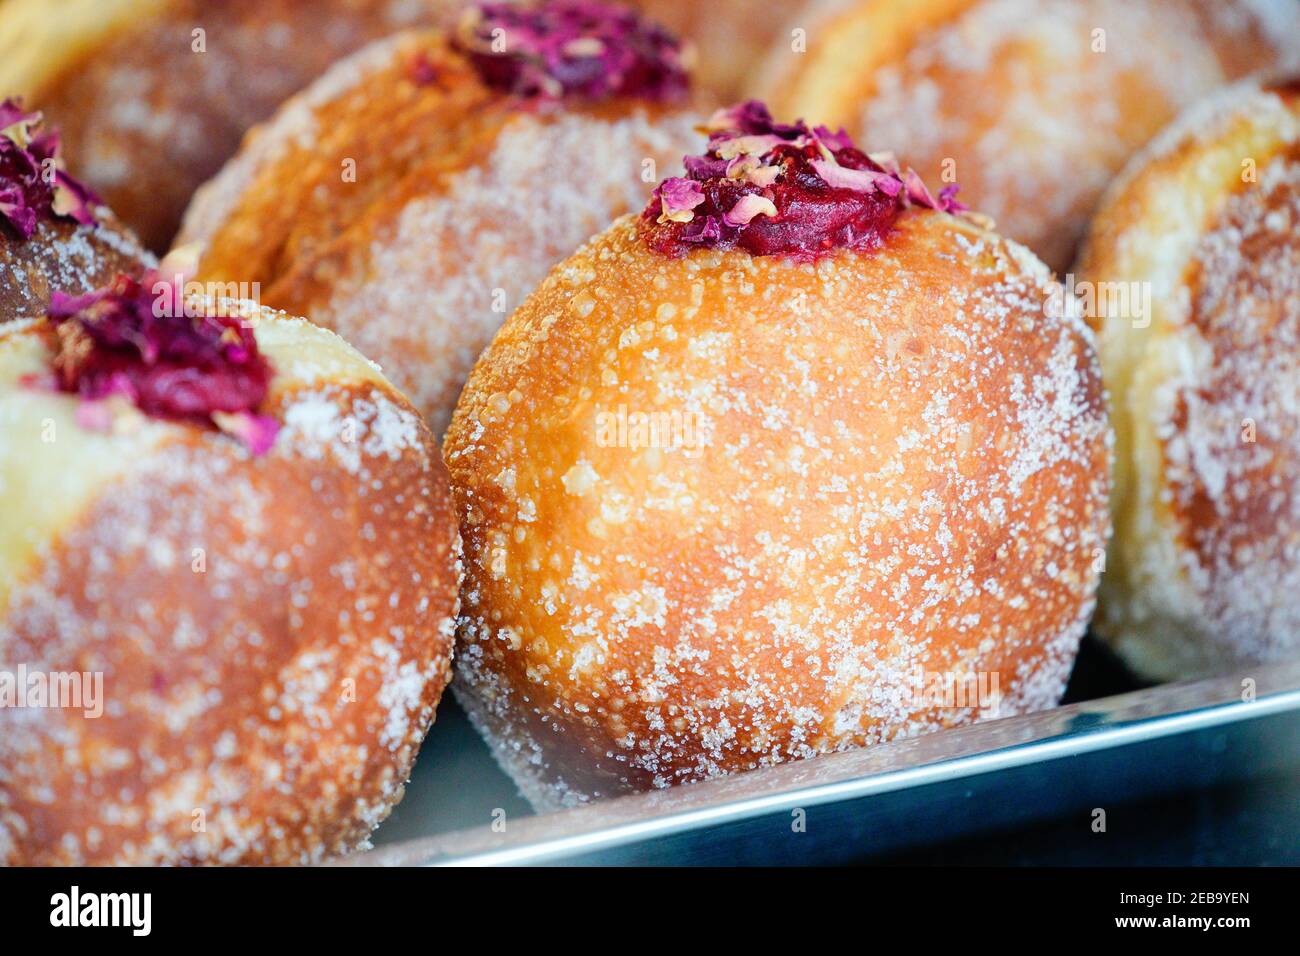 (210212) -- WARSAW, Feb. 12, 2021 (Xinhua) -- Polish fried donuts, or Paczki, are seen in a window display at a bakery in Warsaw, Poland, Feb. 11, 2021. People in Poland eat Paczki, fried donuts filled with cream or jam, on Fat Thursday to mark the last Thursday before the start of Lent. (Photo by Jaap Arriens/Xinhua) Stock Photo